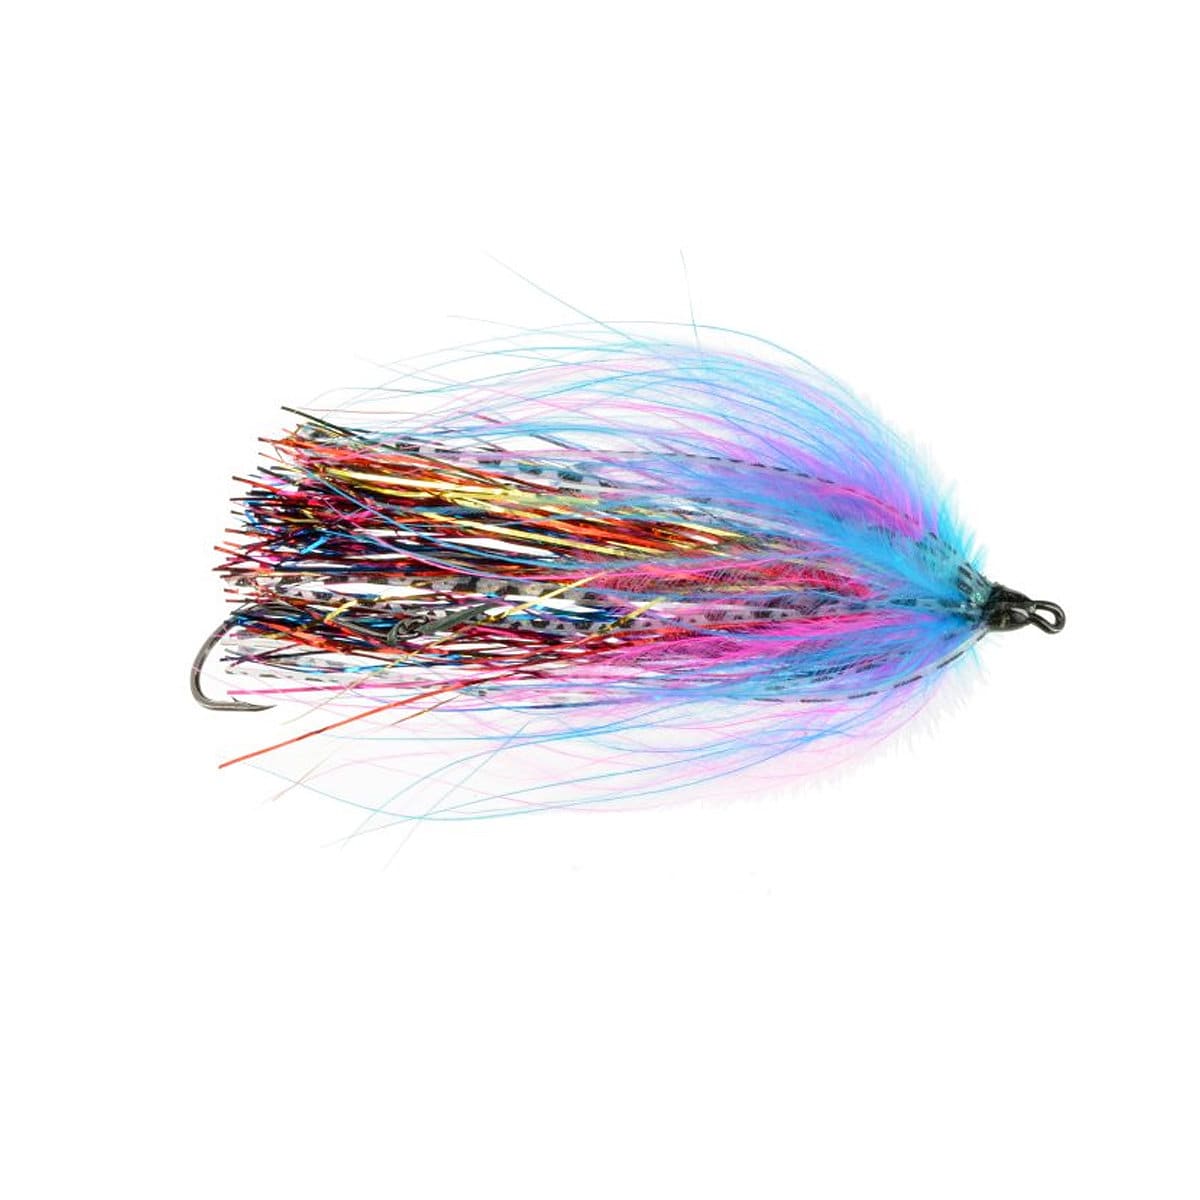 Trout Streamer - Rave Dawn - Epic Streamer Patterns - Hand Tied Flies -  Trout Pike & Muskie Streamers - Fly Fishing Gifts for Men